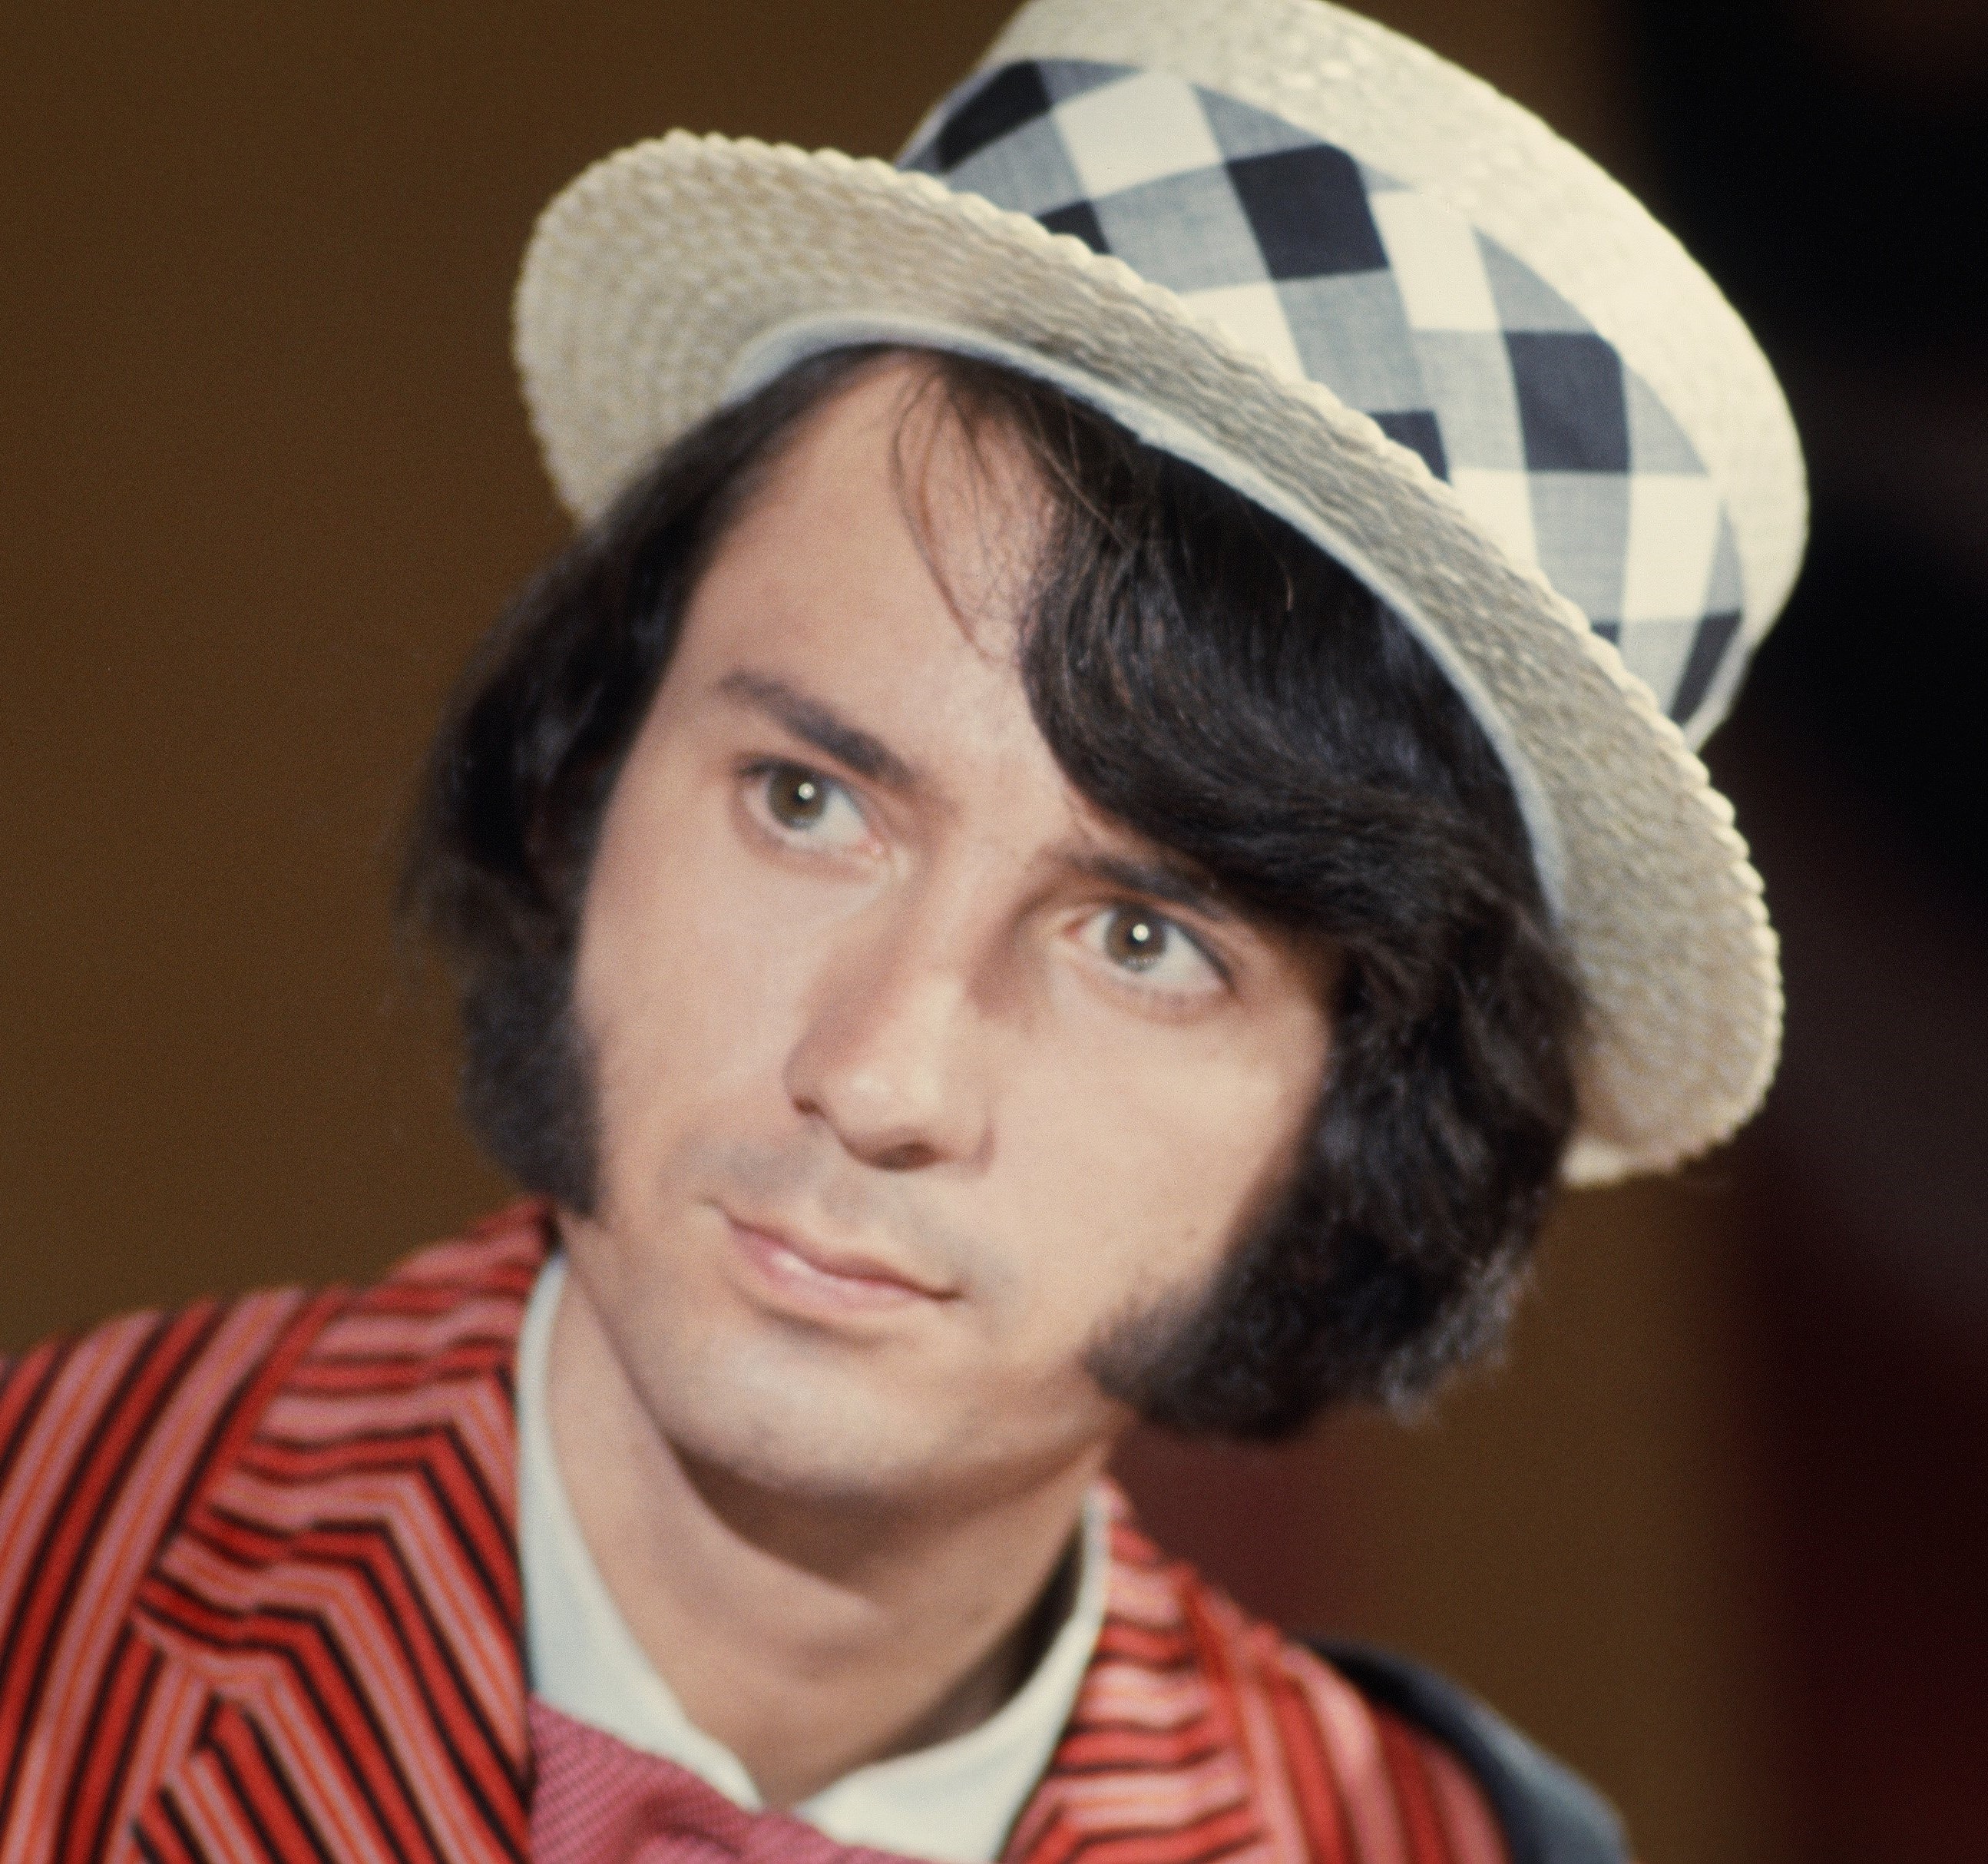 Mike Nesmith of The Monkees wearing a hat